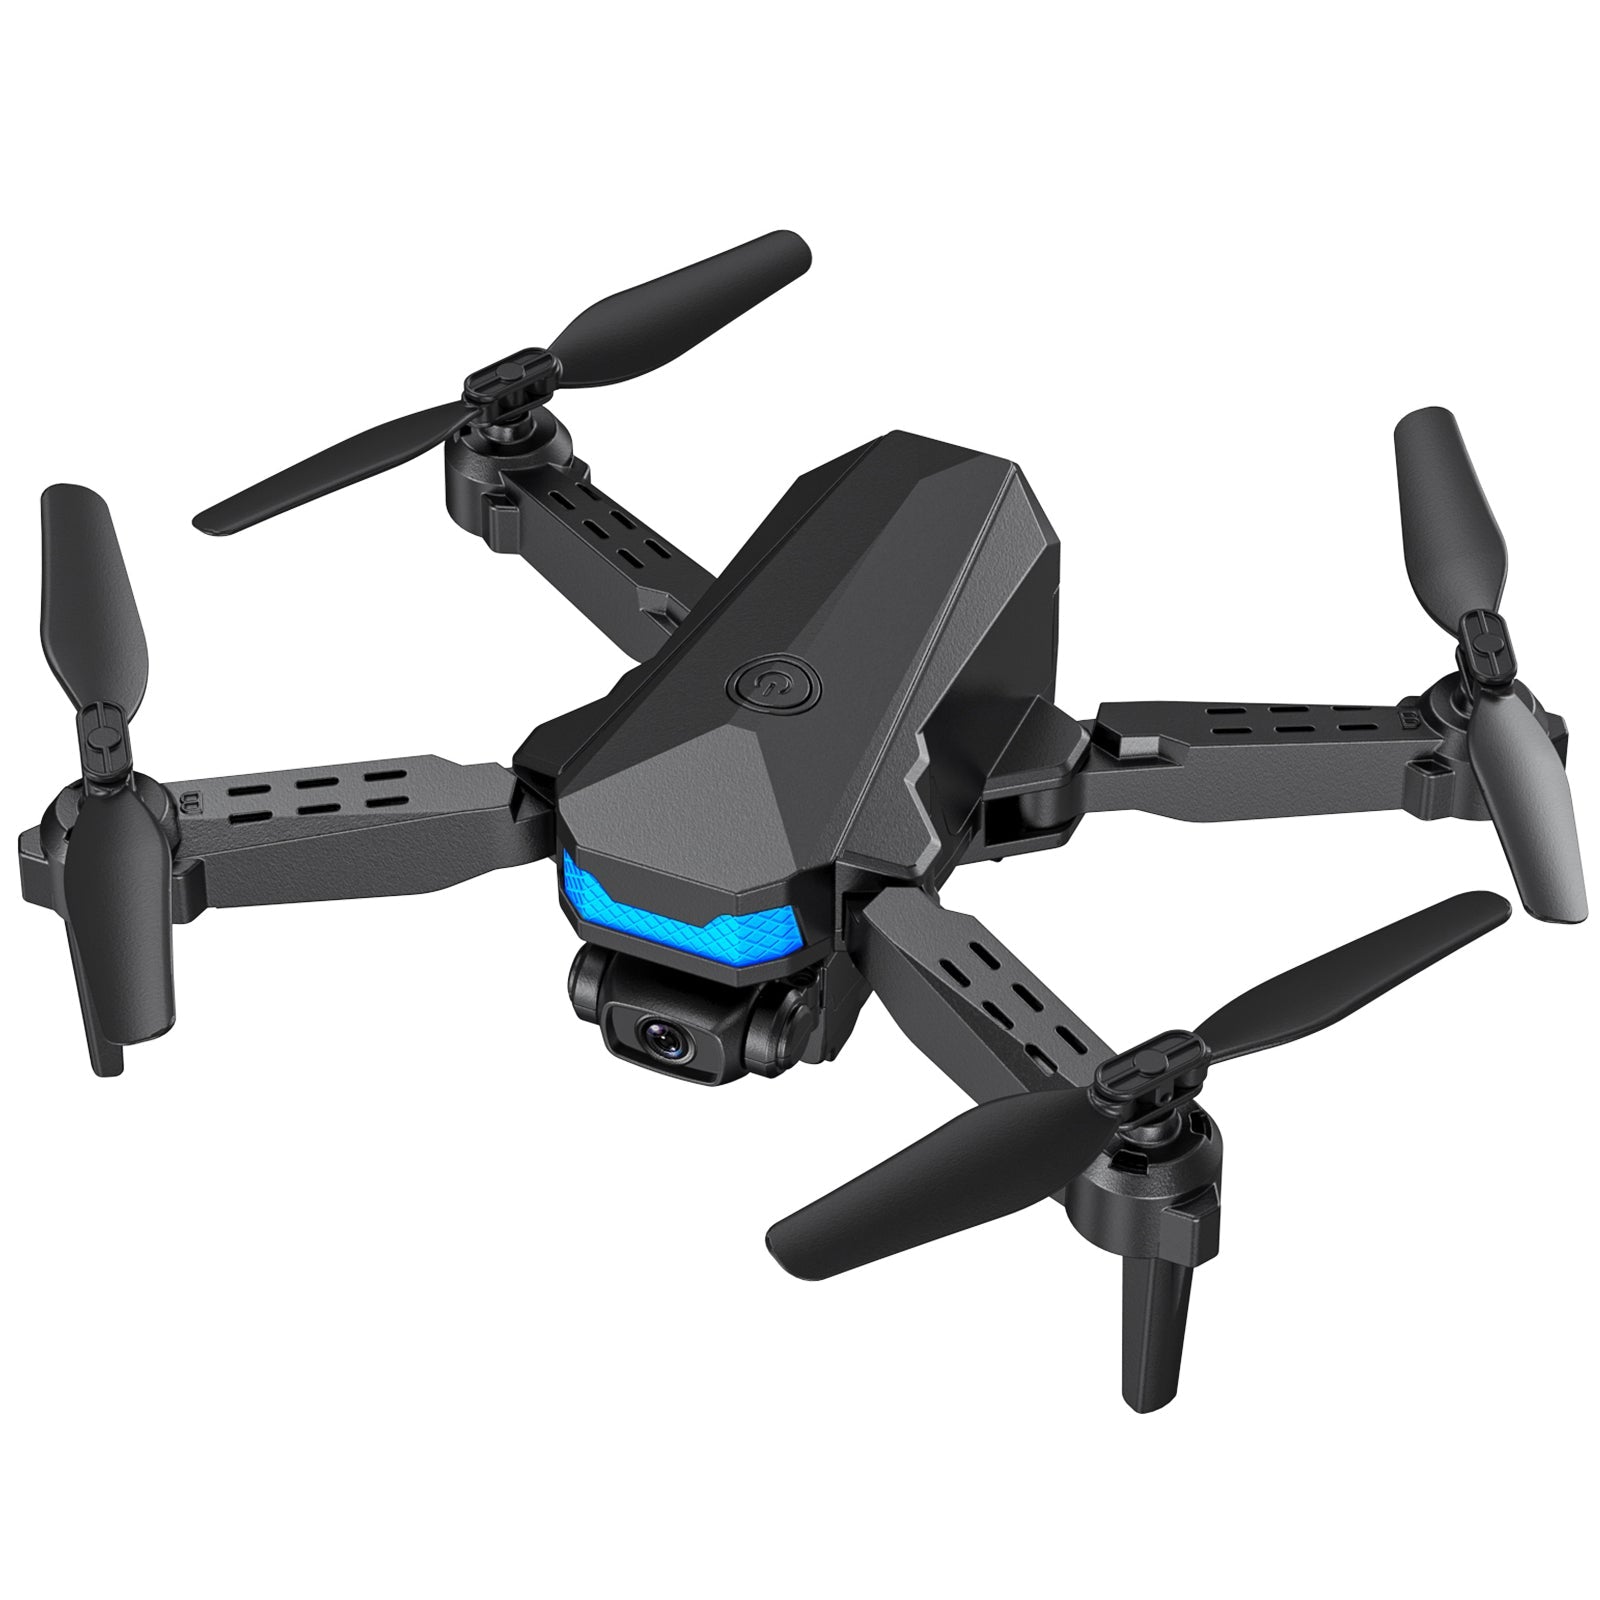 ATTOP Mini Drone with Camera, 1080P Camera Drone FPV RC Quadcopter w/ Voice  & Gesture Control, Altitude Hold, Headless Mode, 3 Speed Modes, 3